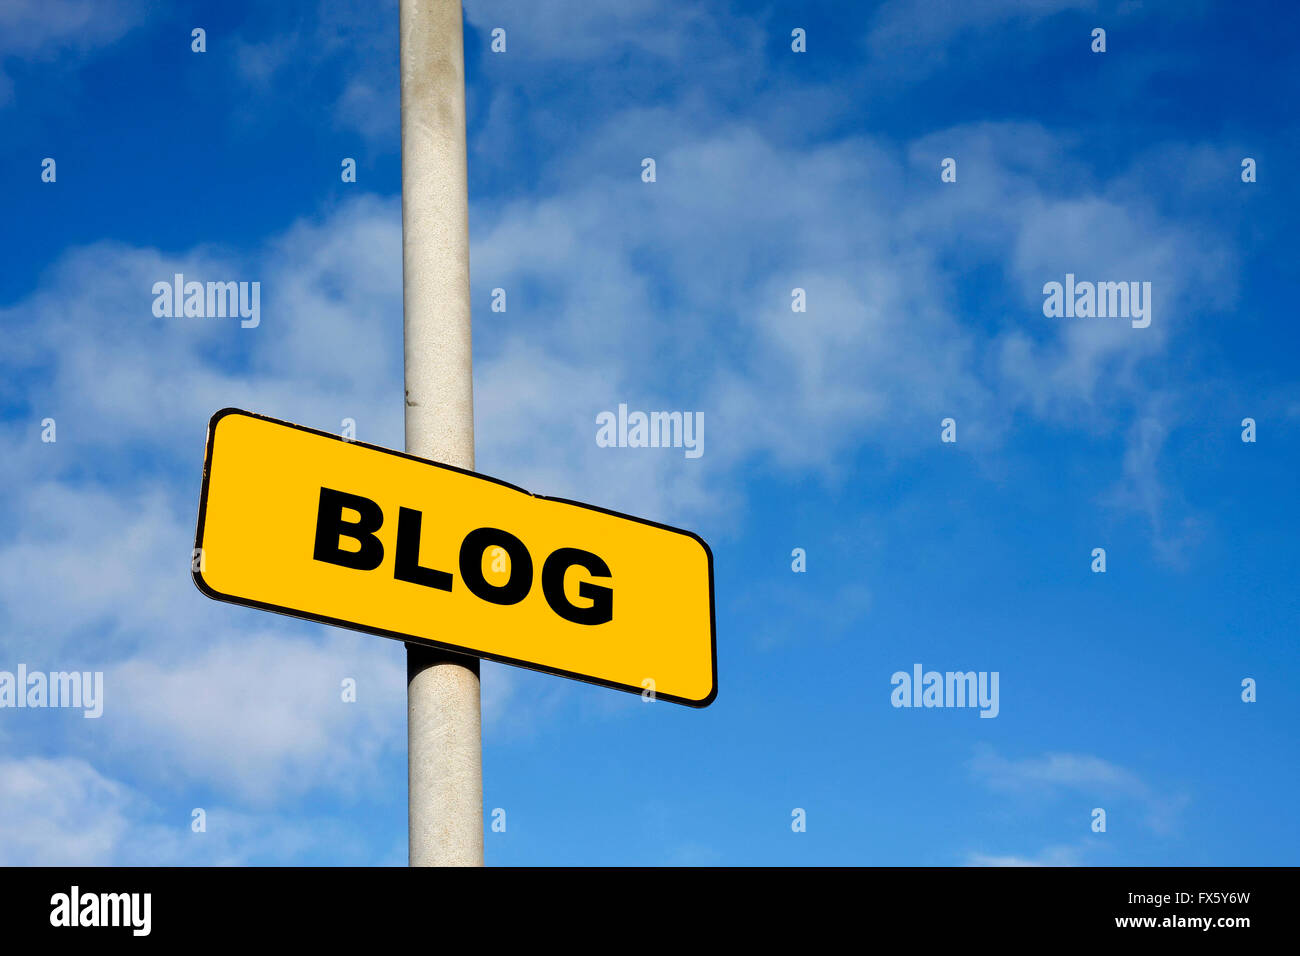 Yellow blog sign against a blue sky Stock Photo